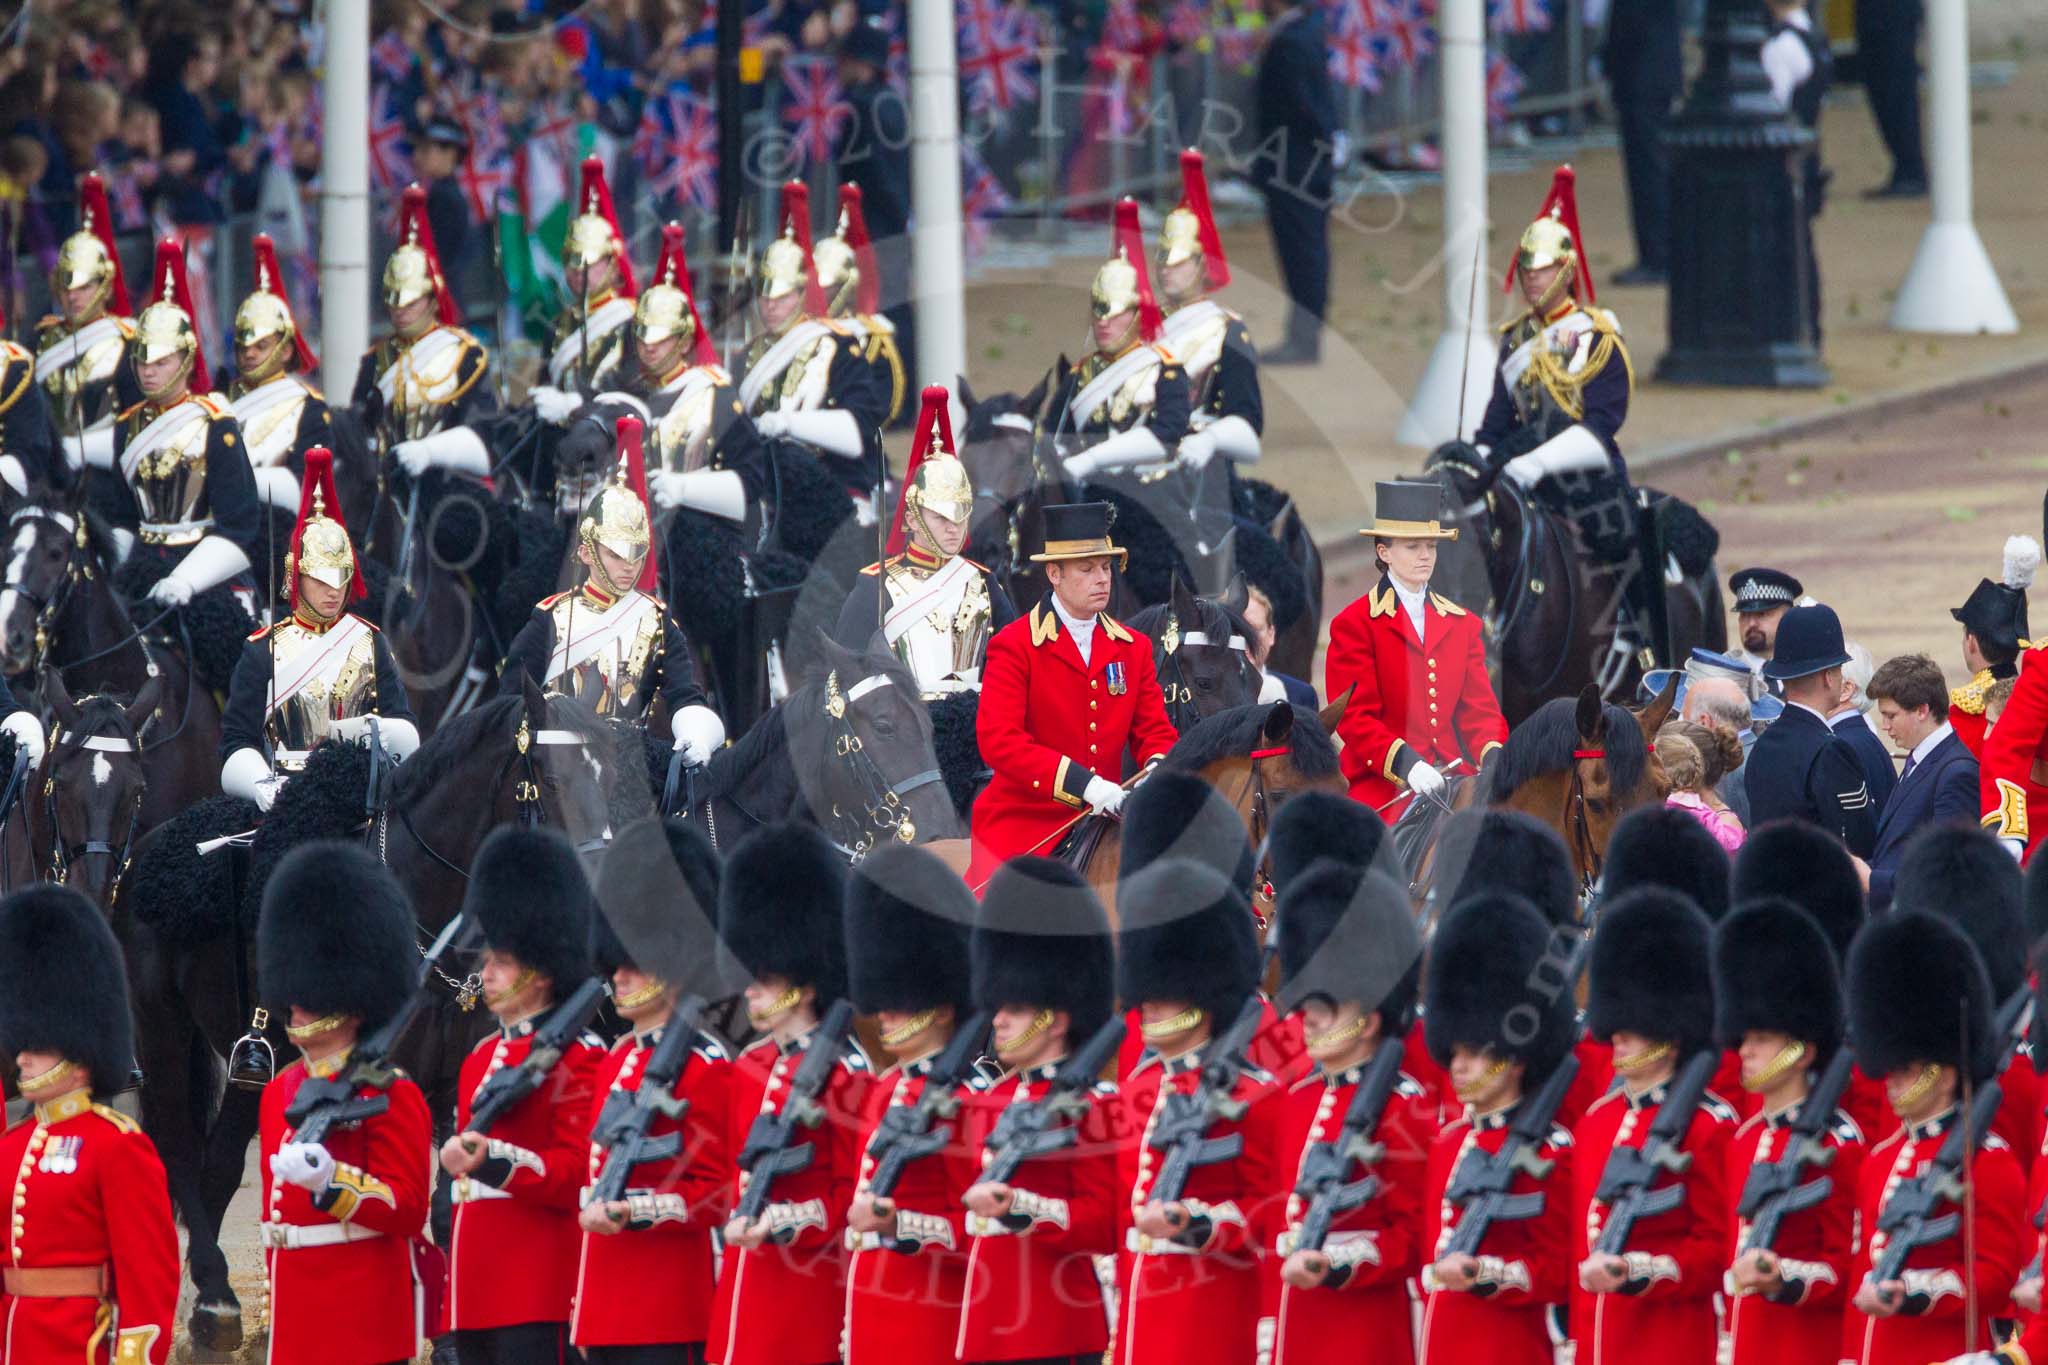 Trooping the Colour 2015. Image #250, 13 June 2015 10:59 Horse Guards Parade, London, UK